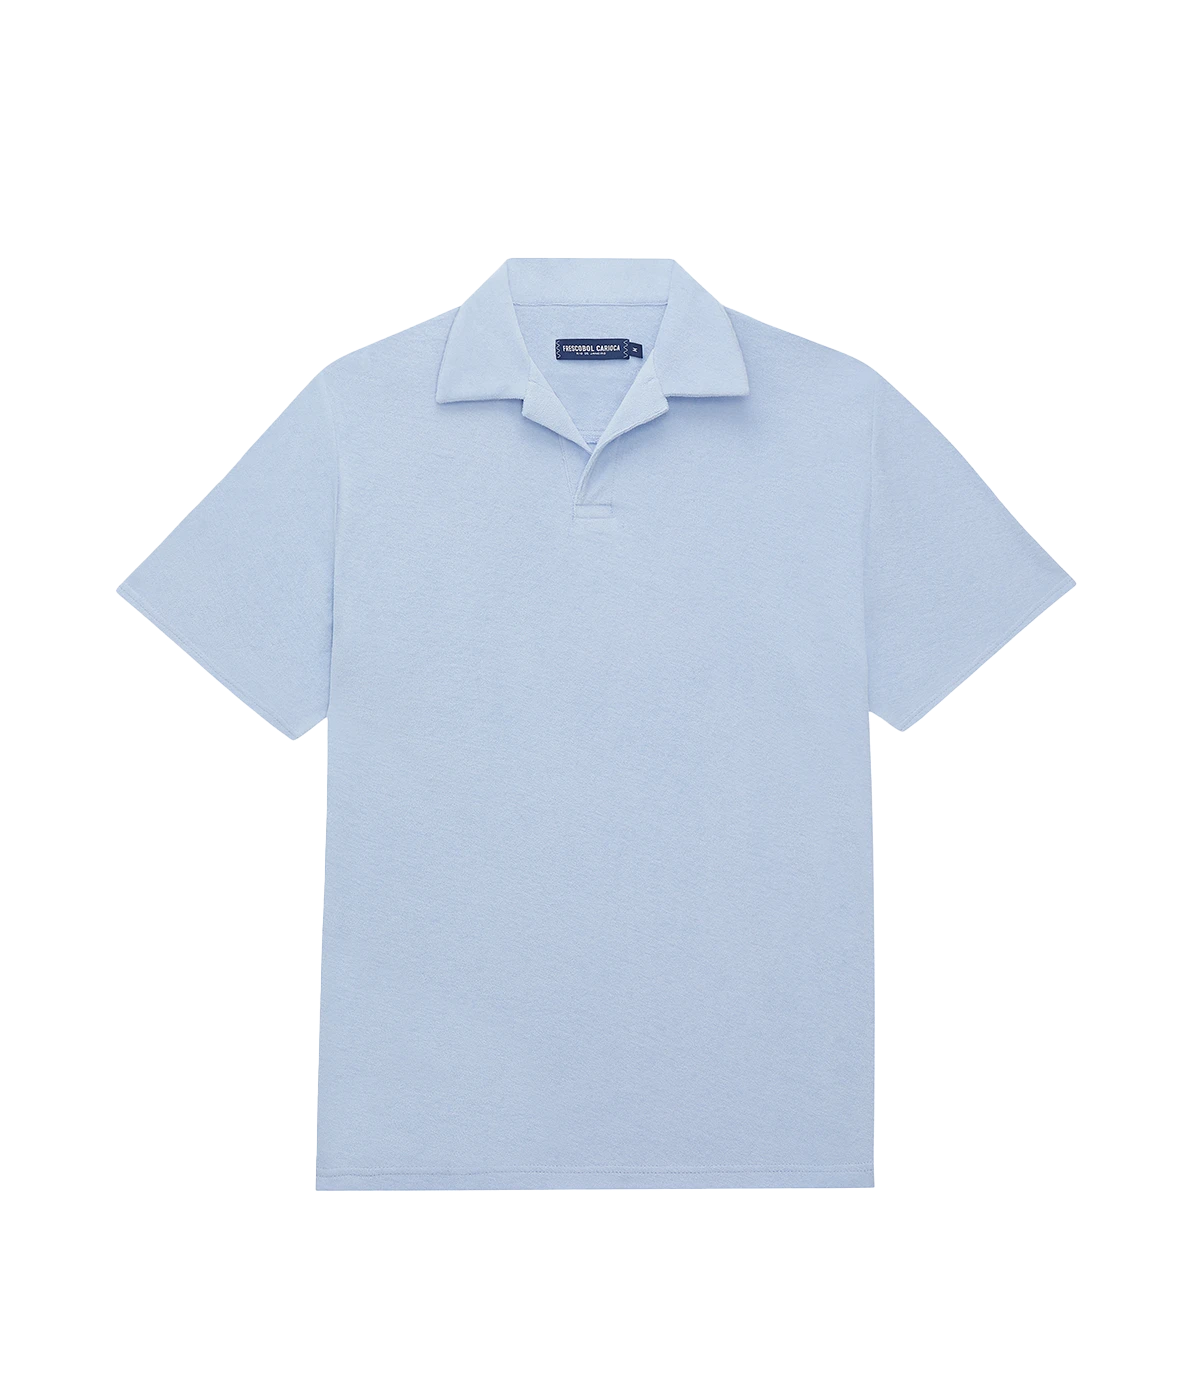 blue short sleeve cotton terry polo with an open collar and half placket.